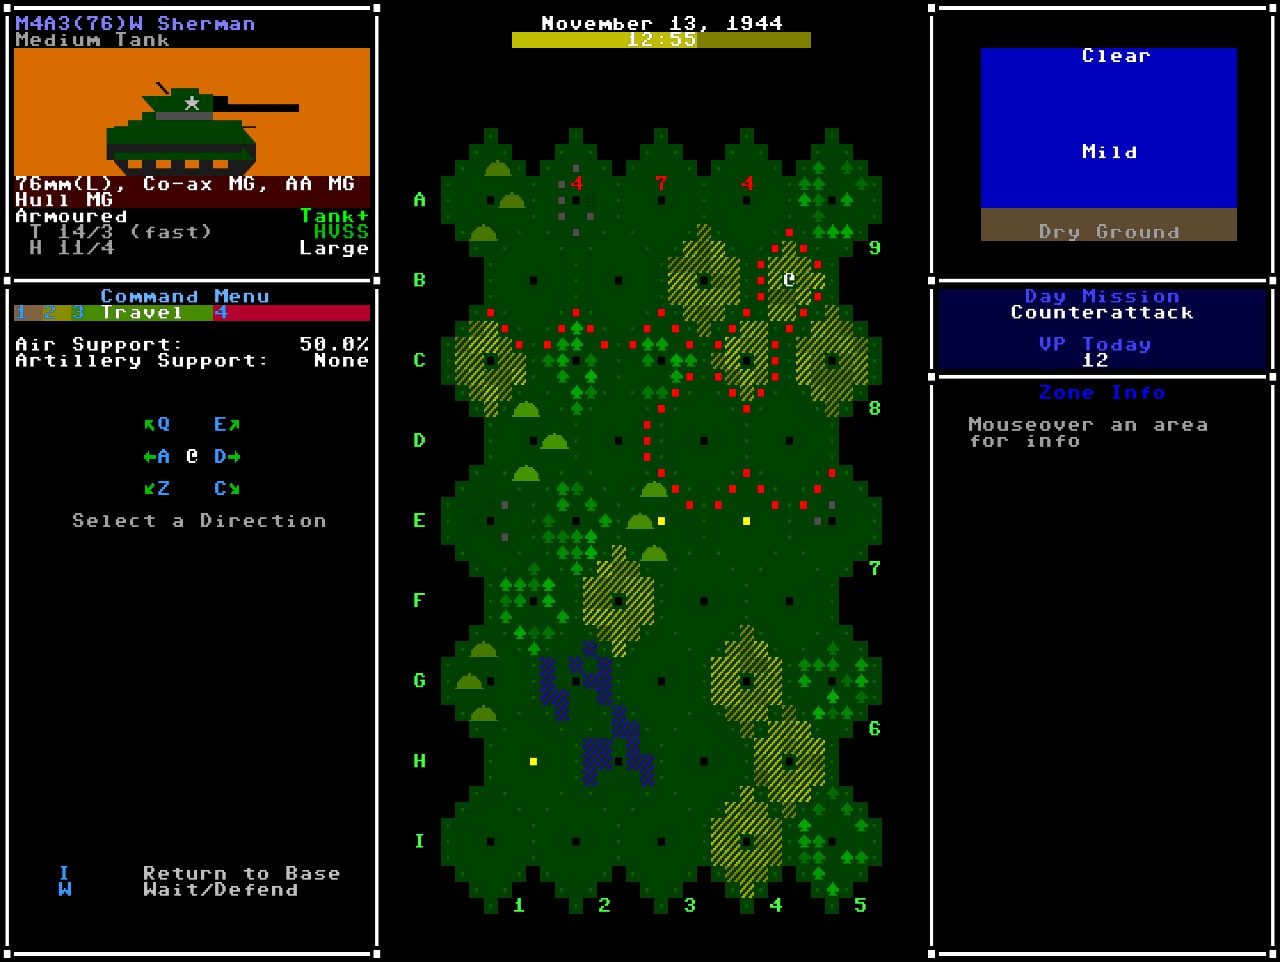 Armoured Commander II - Survival Tips and Tricks How to Increase Tank Commanders in Game - 2. Risk vs. Reward - Moving on the terrain overview map - EBD6FD2